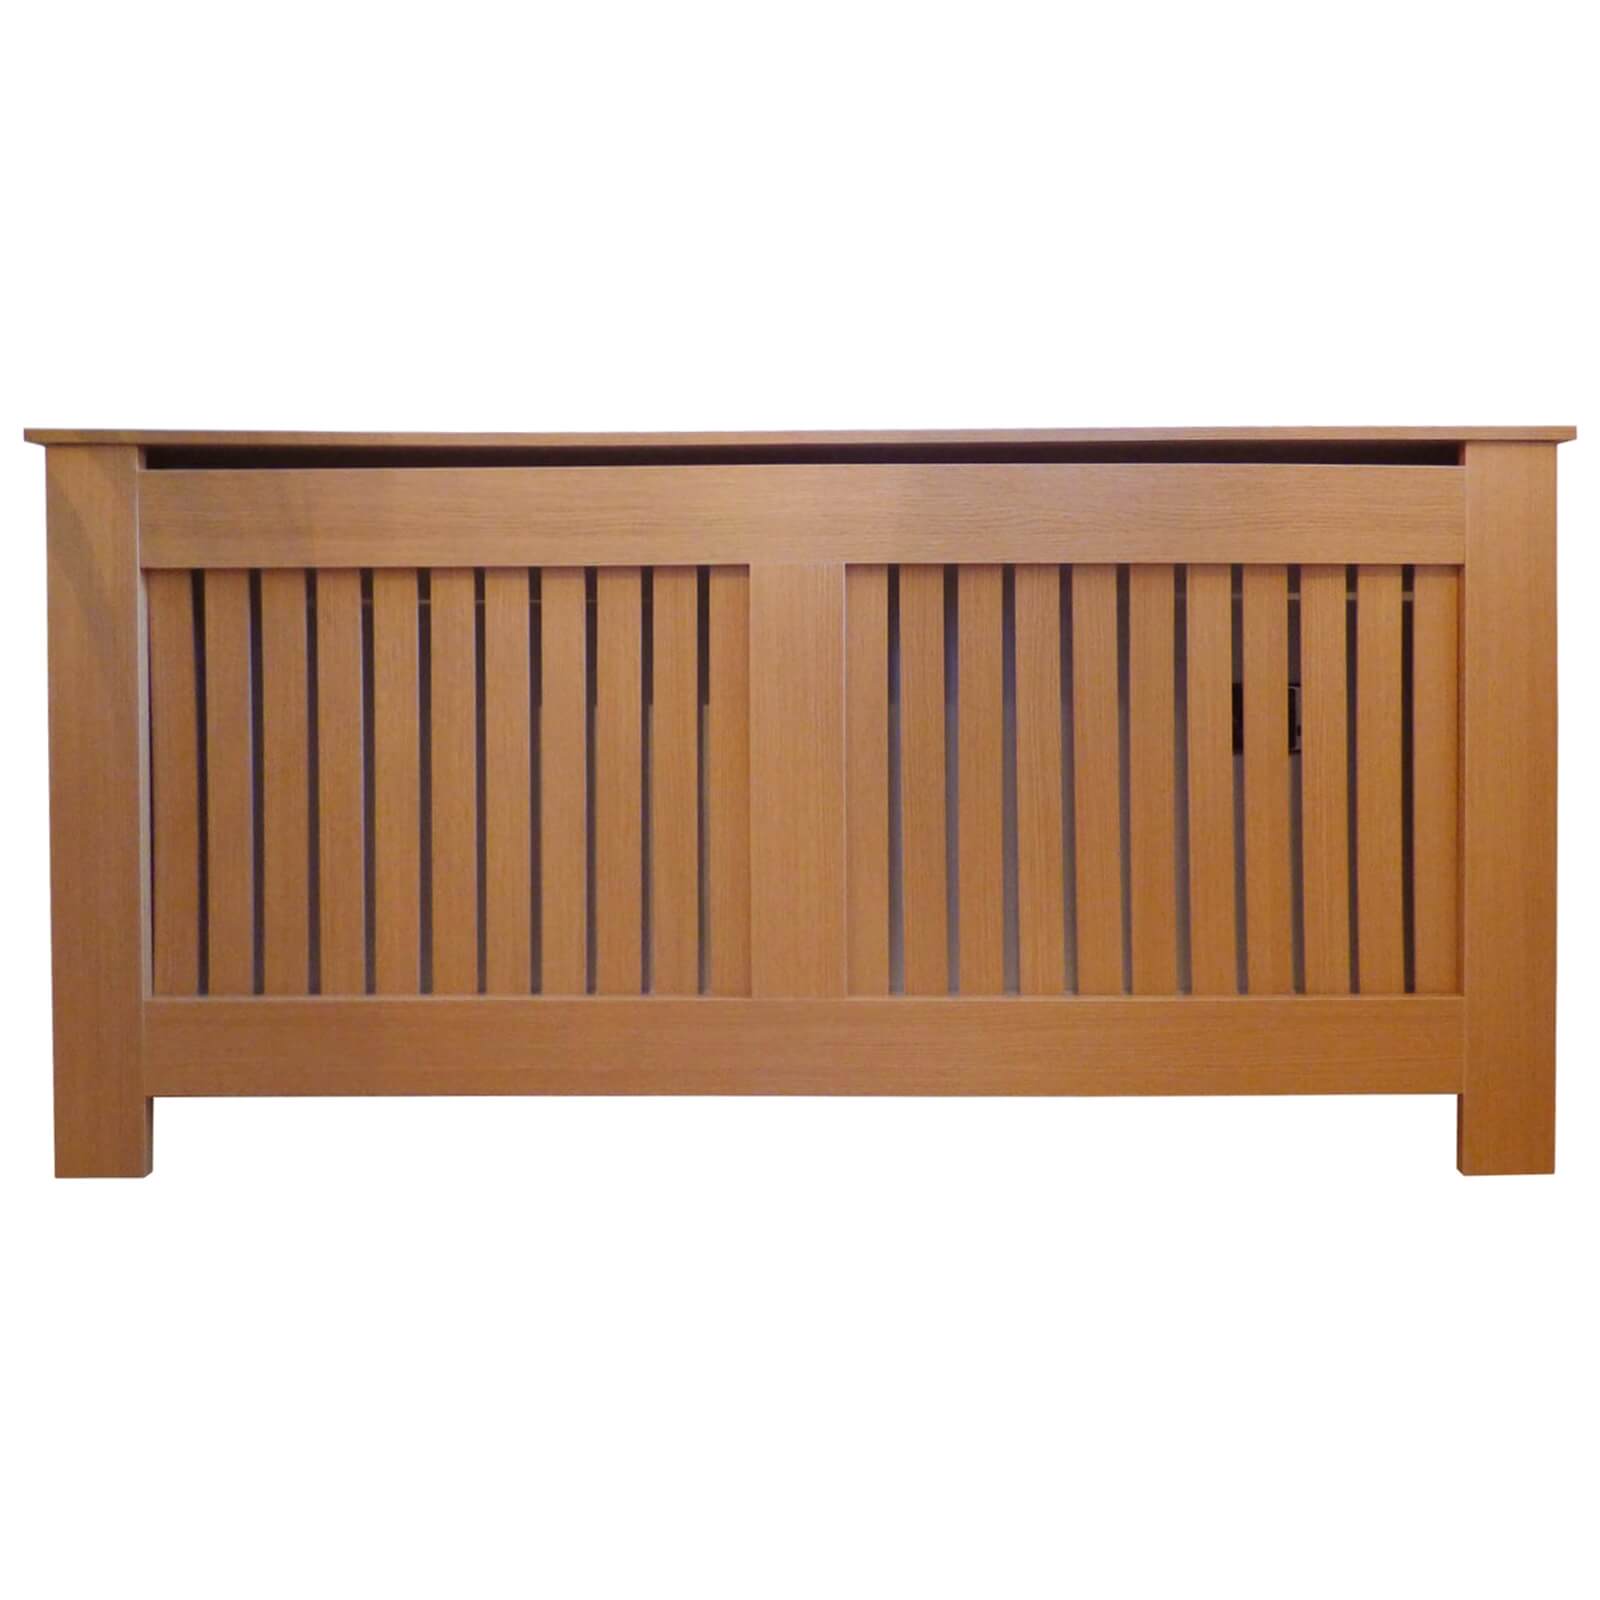 Oak Radiator Cover with Vertical Design - Extra Large